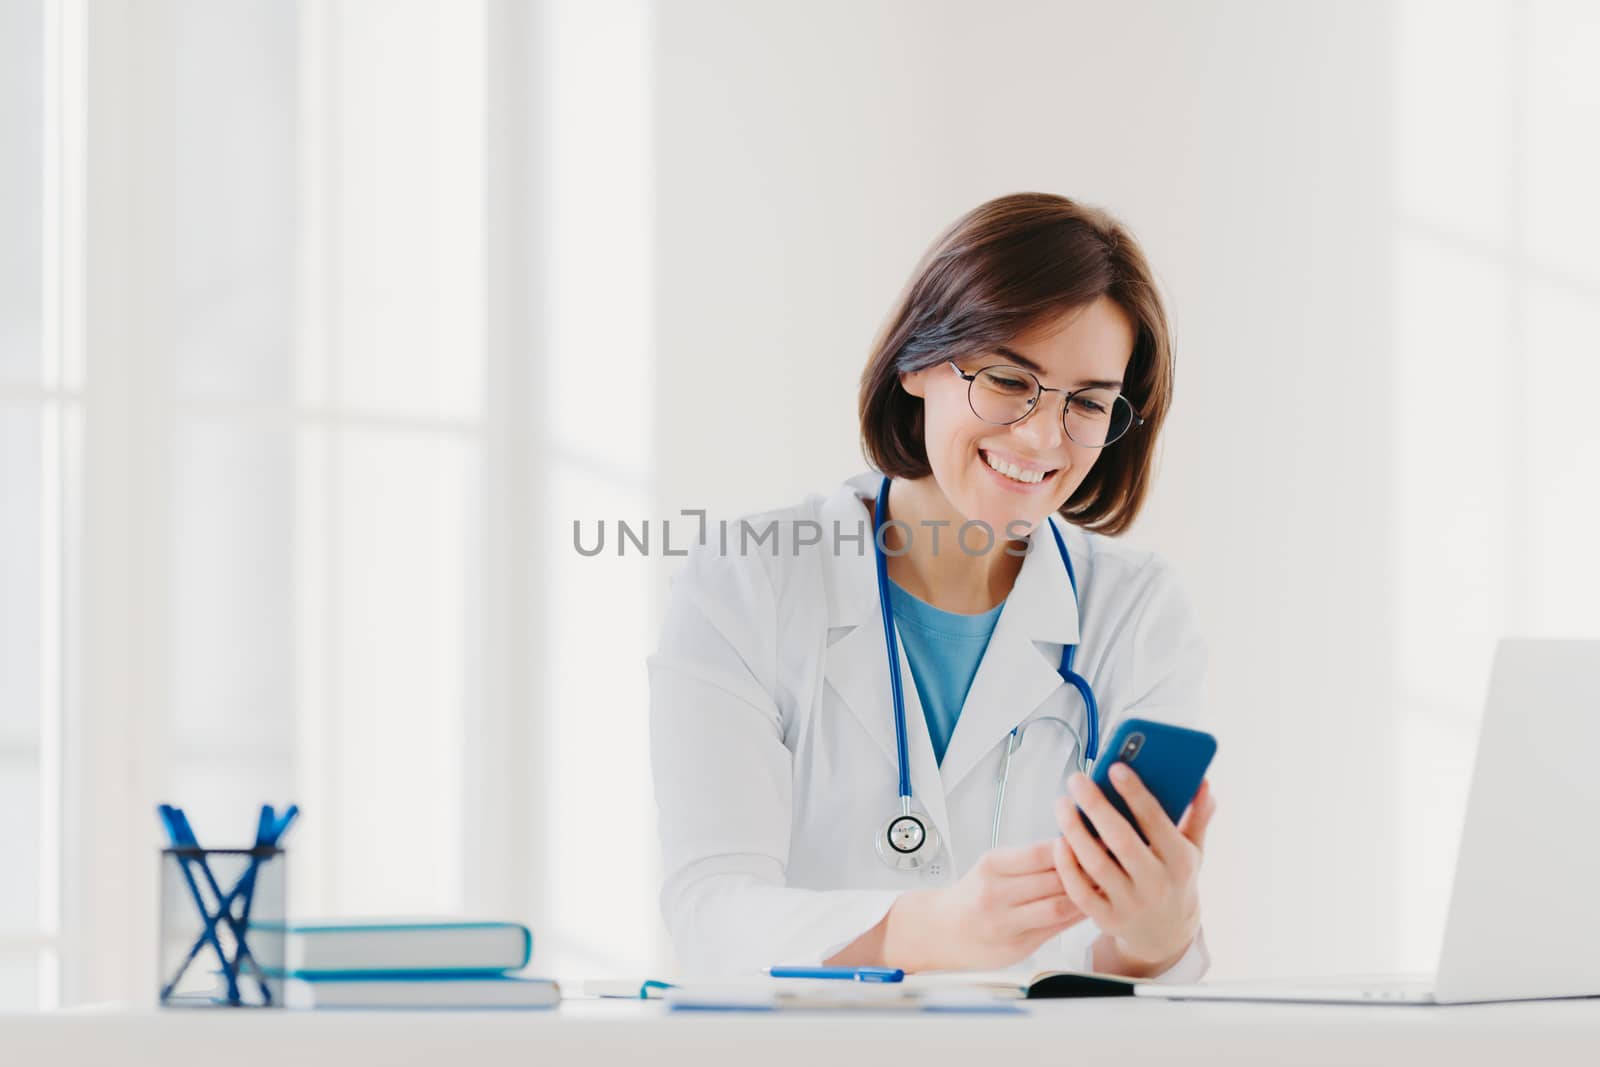 Positive female medical worker involved in chatting, holds mobile phone and sends messages, wears medical gown, has friendly cheerful expression, poses at desktop gives online consultation for patient